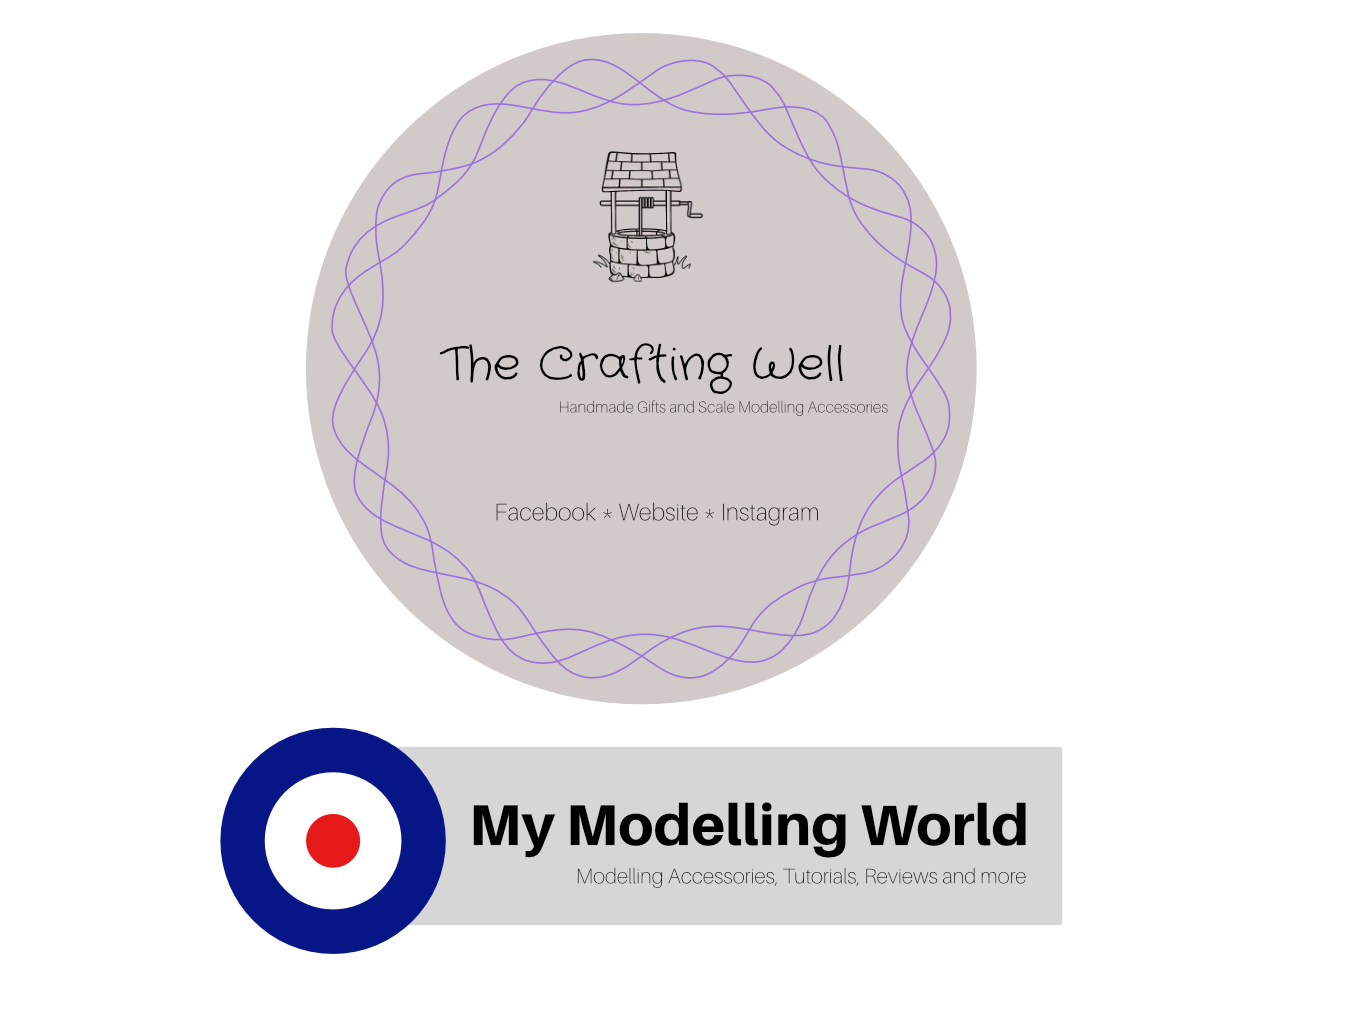 The Crafting Well